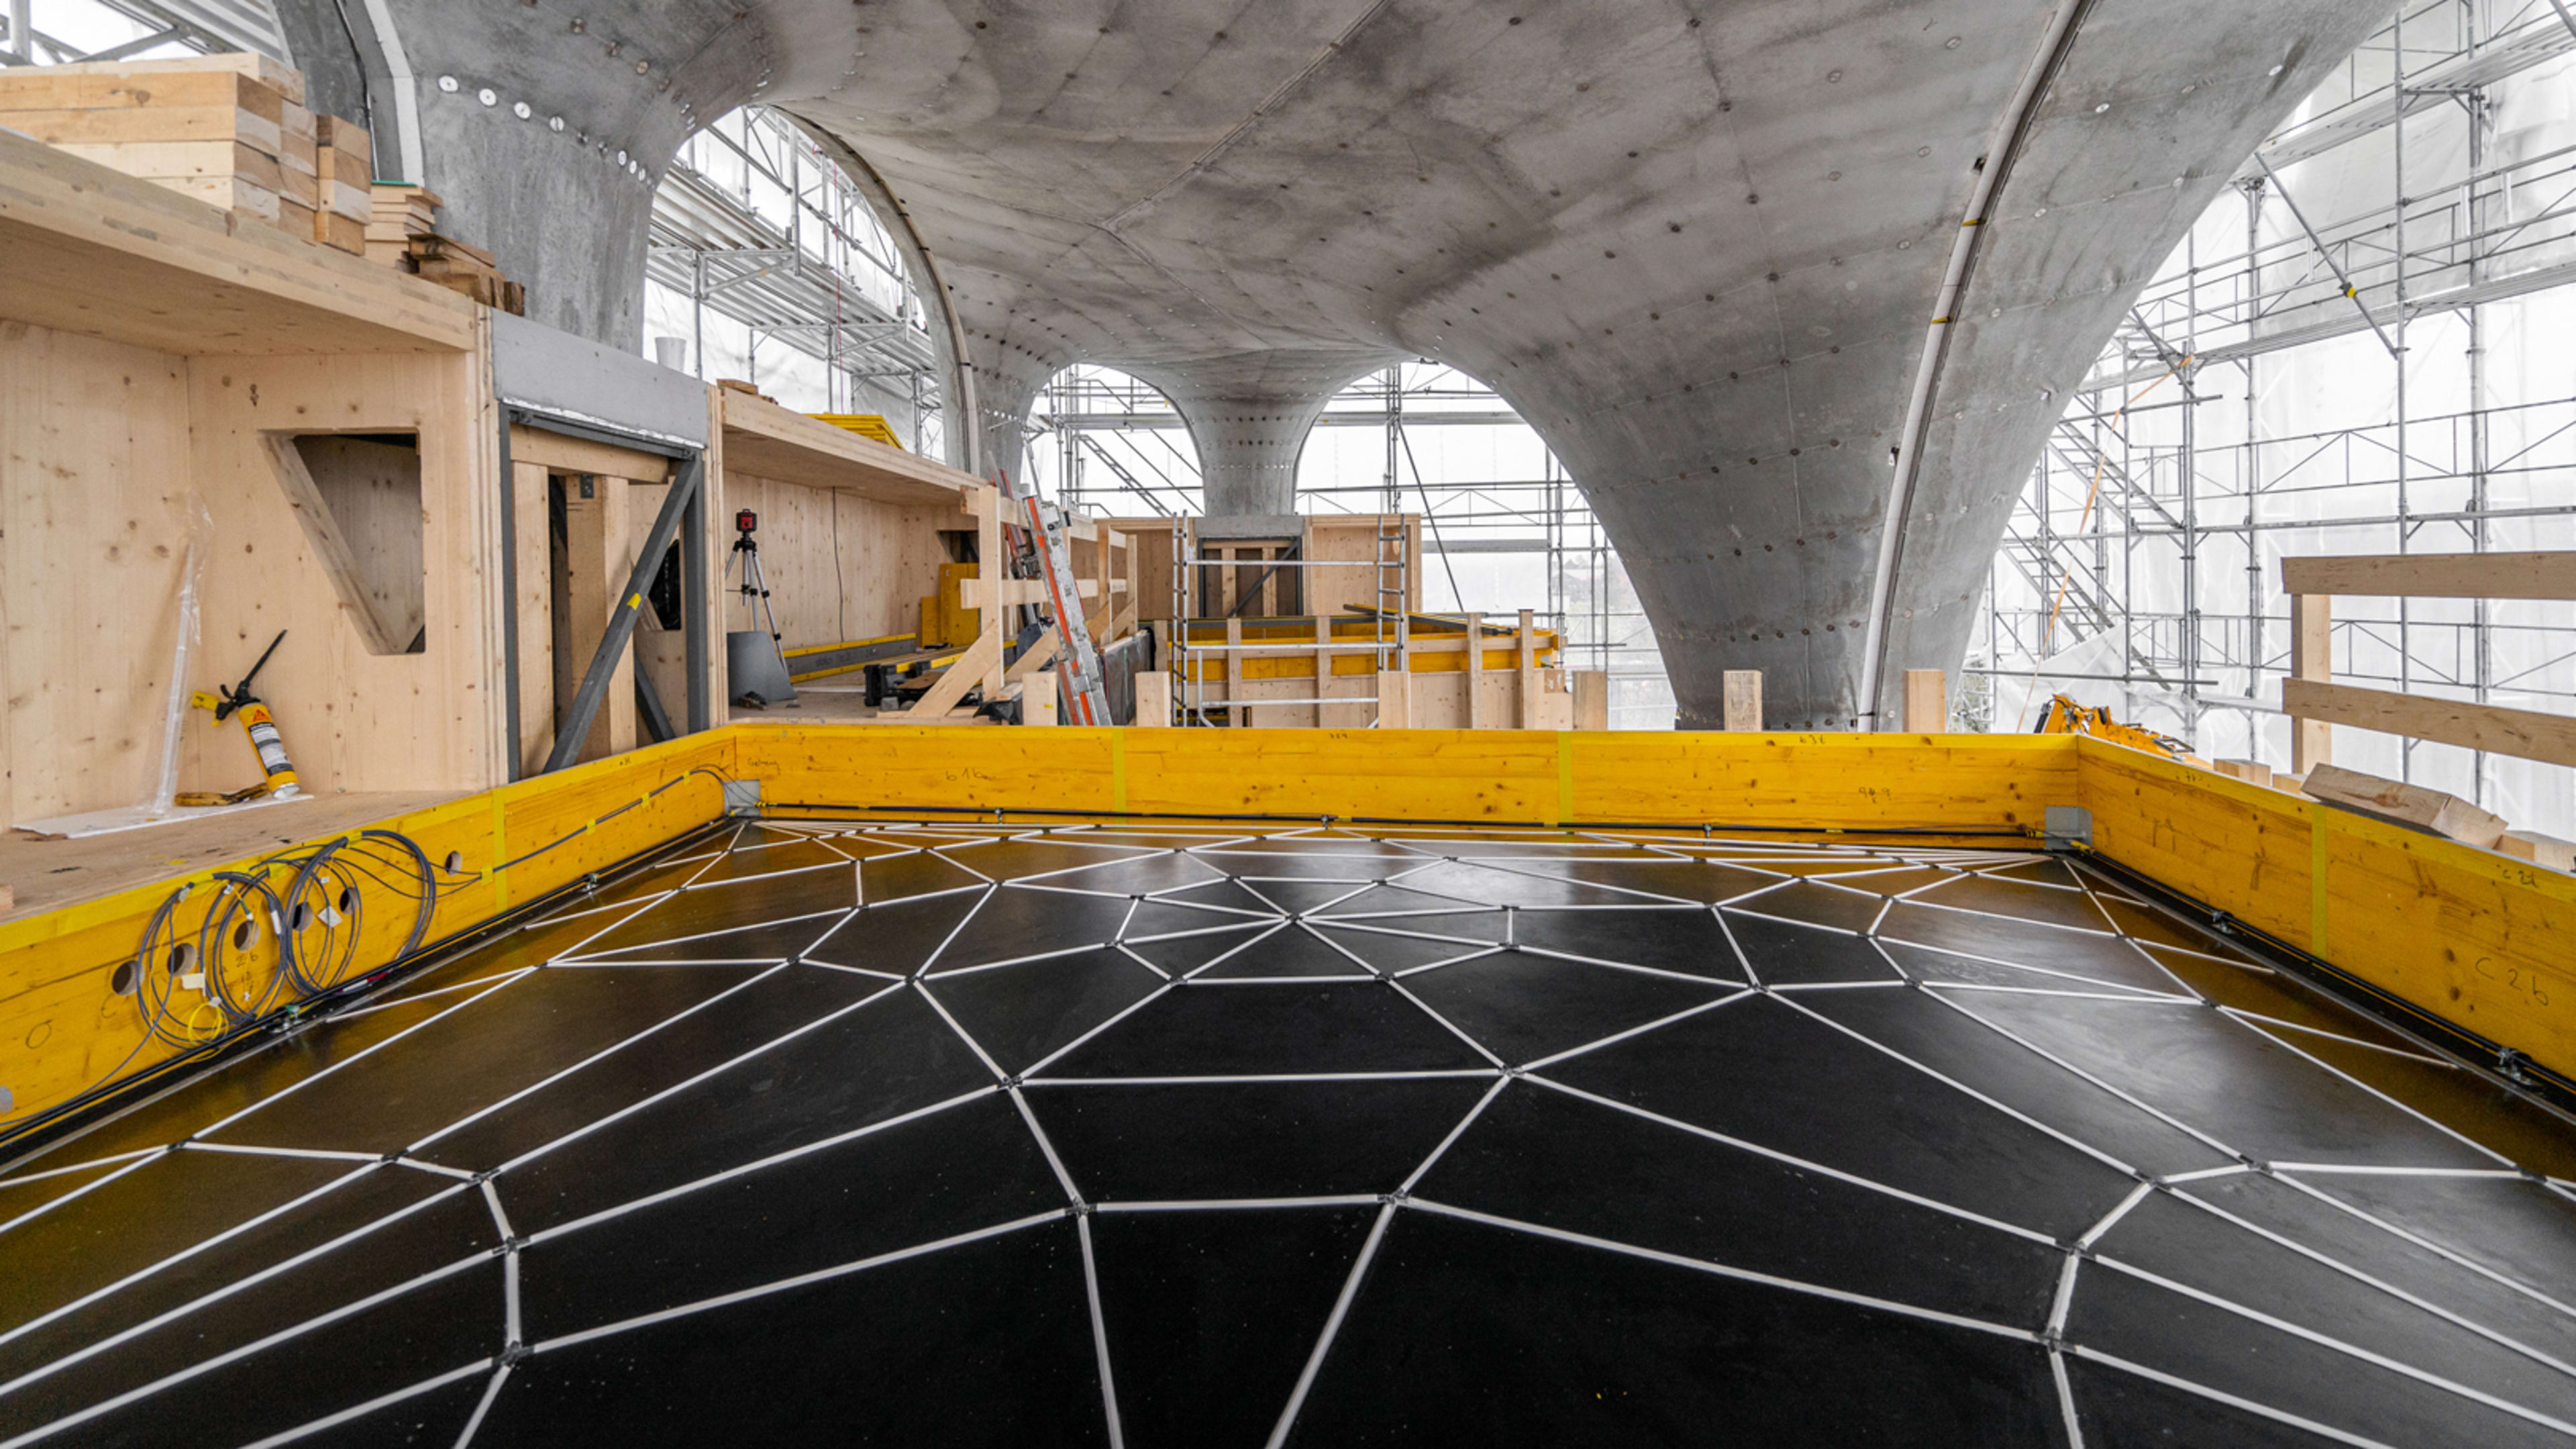 These ingenious floors use 70% less concrete and 90% less steel